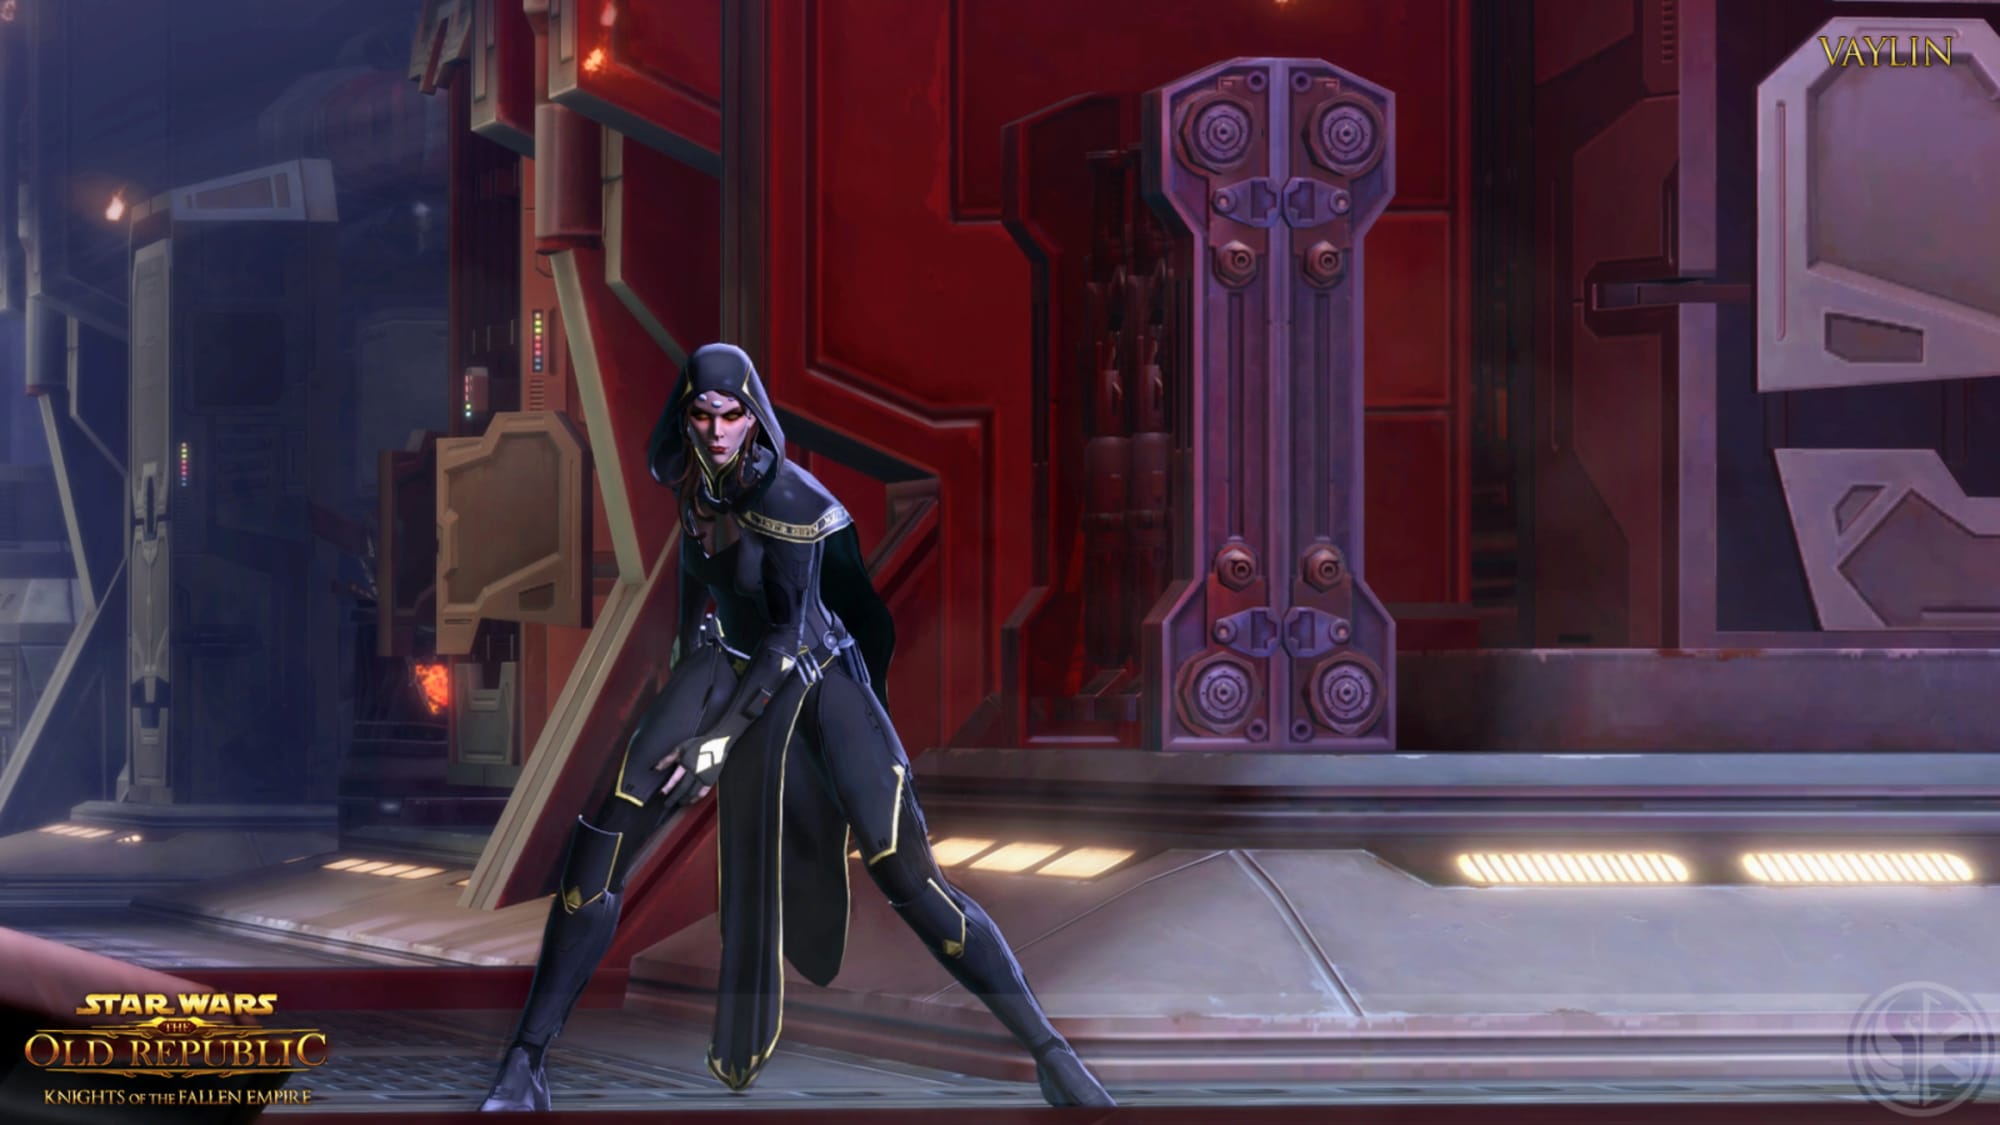 swtor crashes after character selection